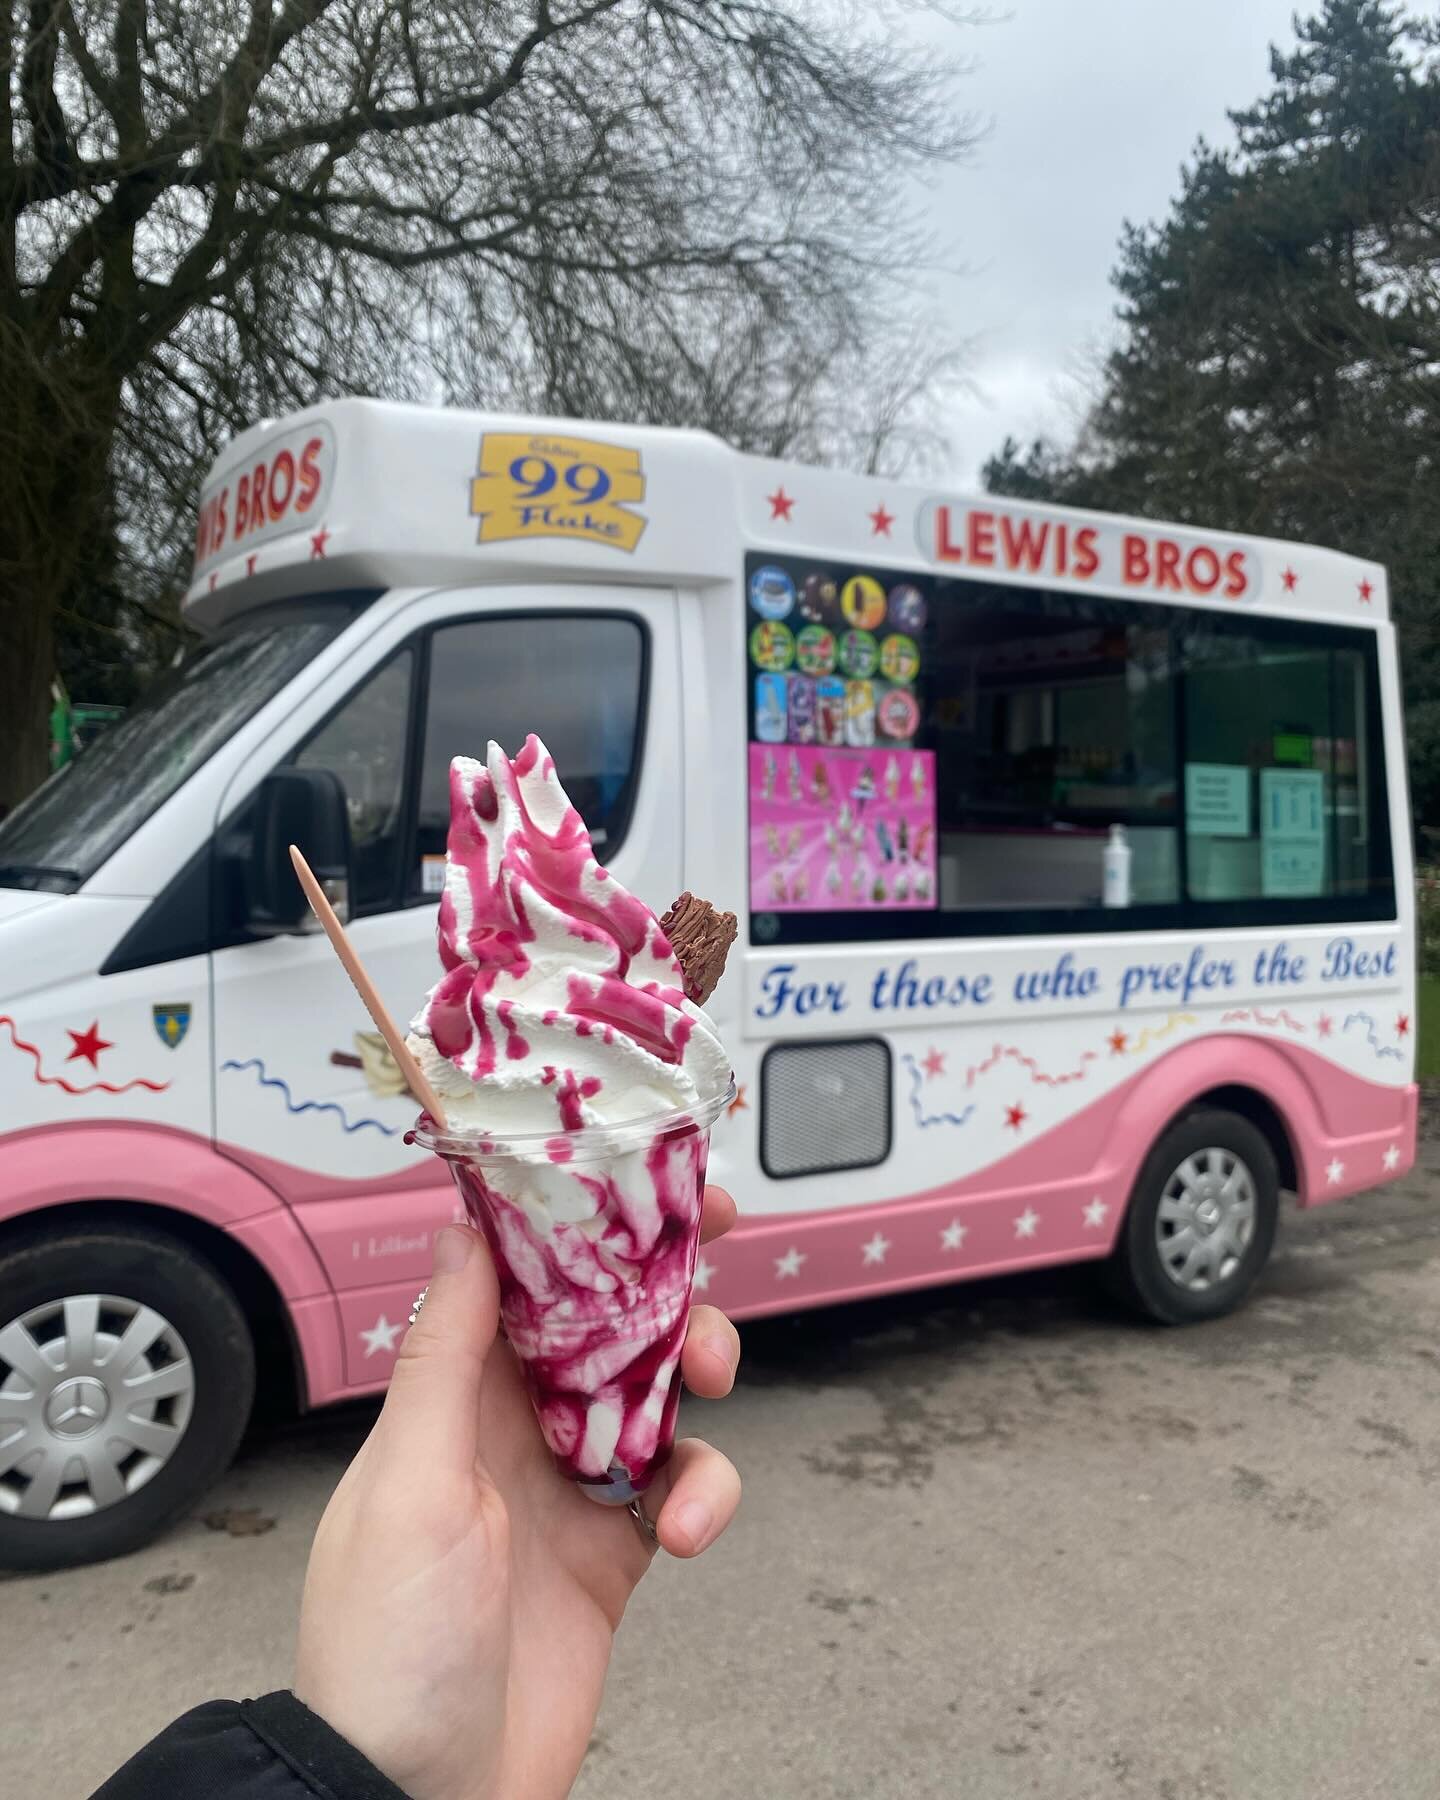 The screwball is such an iconic ice cream!!
With a piece of bubblegum at the bottom of the container and loads of raspberry sauce, it brings back so many childhood memories

#lewisbrosicecream #icecream #icecreamlover #flake #icecreamvan #sweet #swee